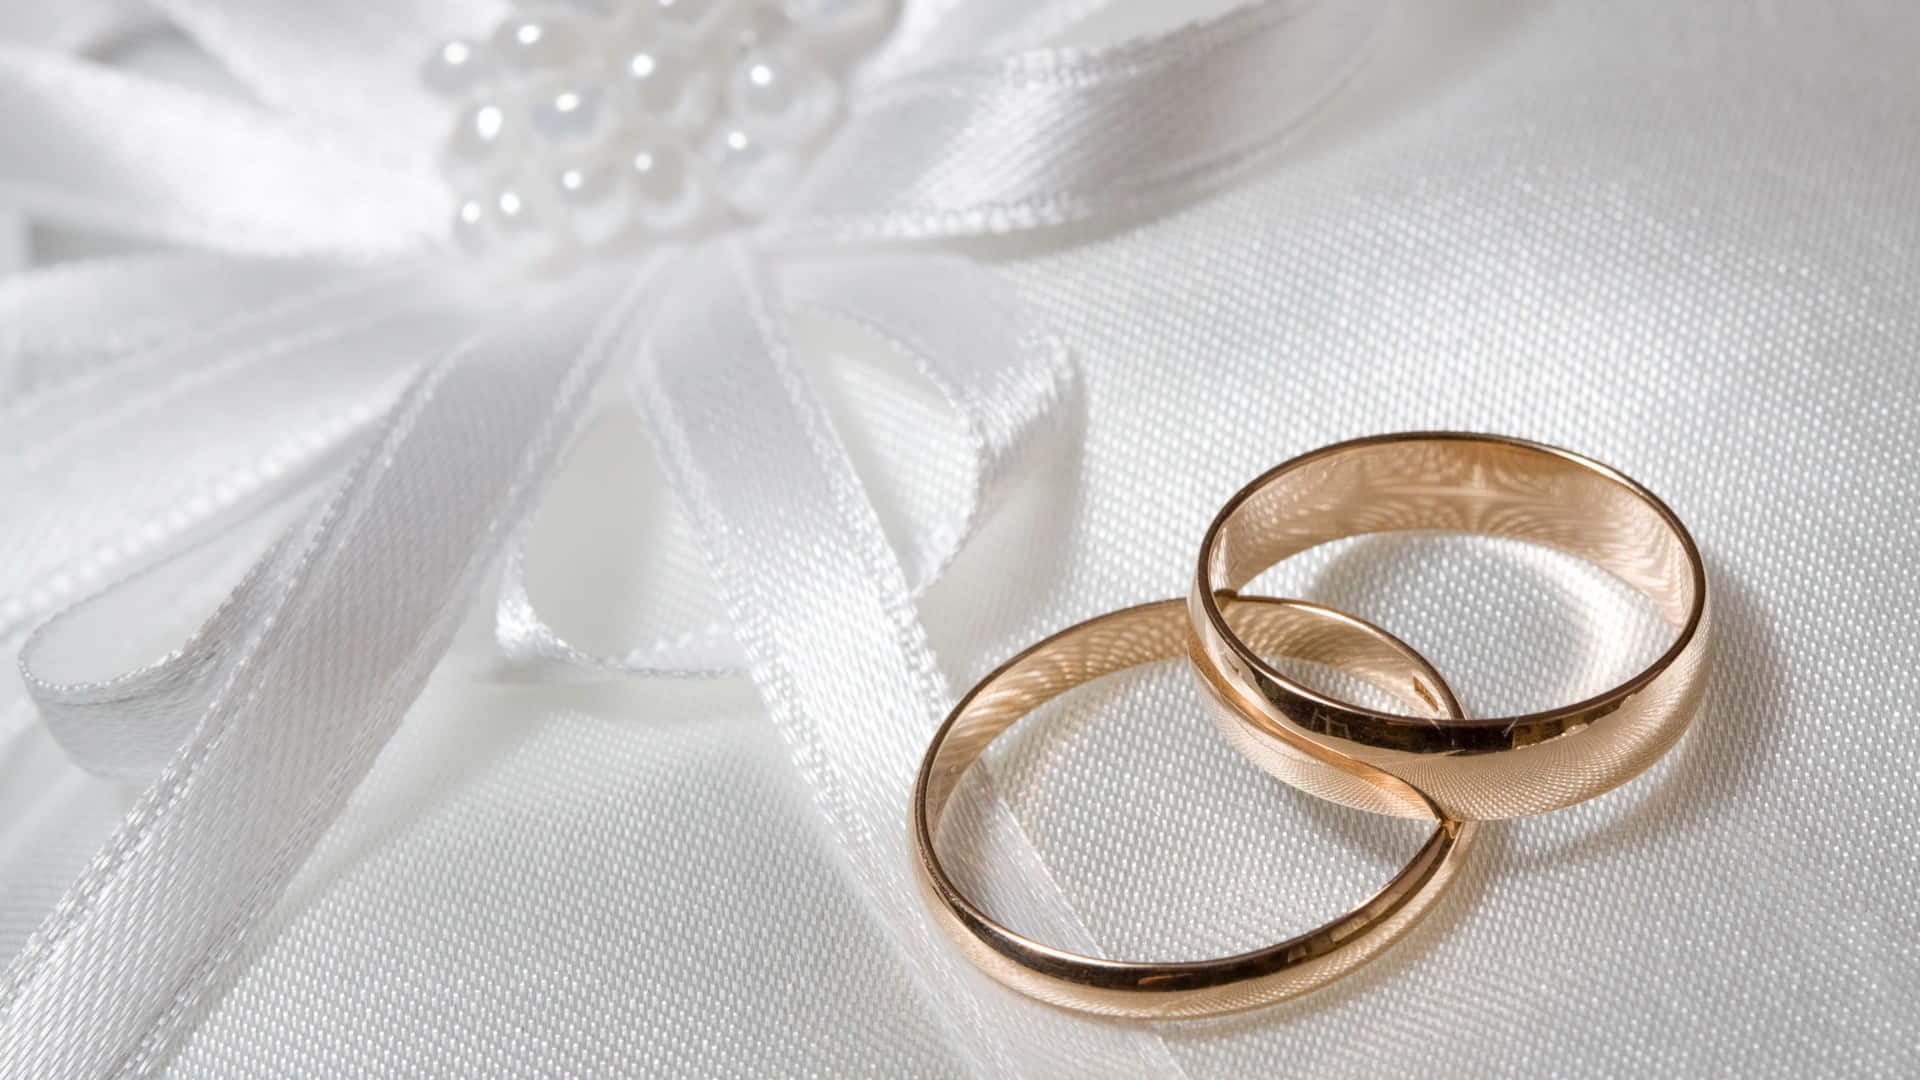 A stunning set of wedding rings to symbolise your love and commitment.